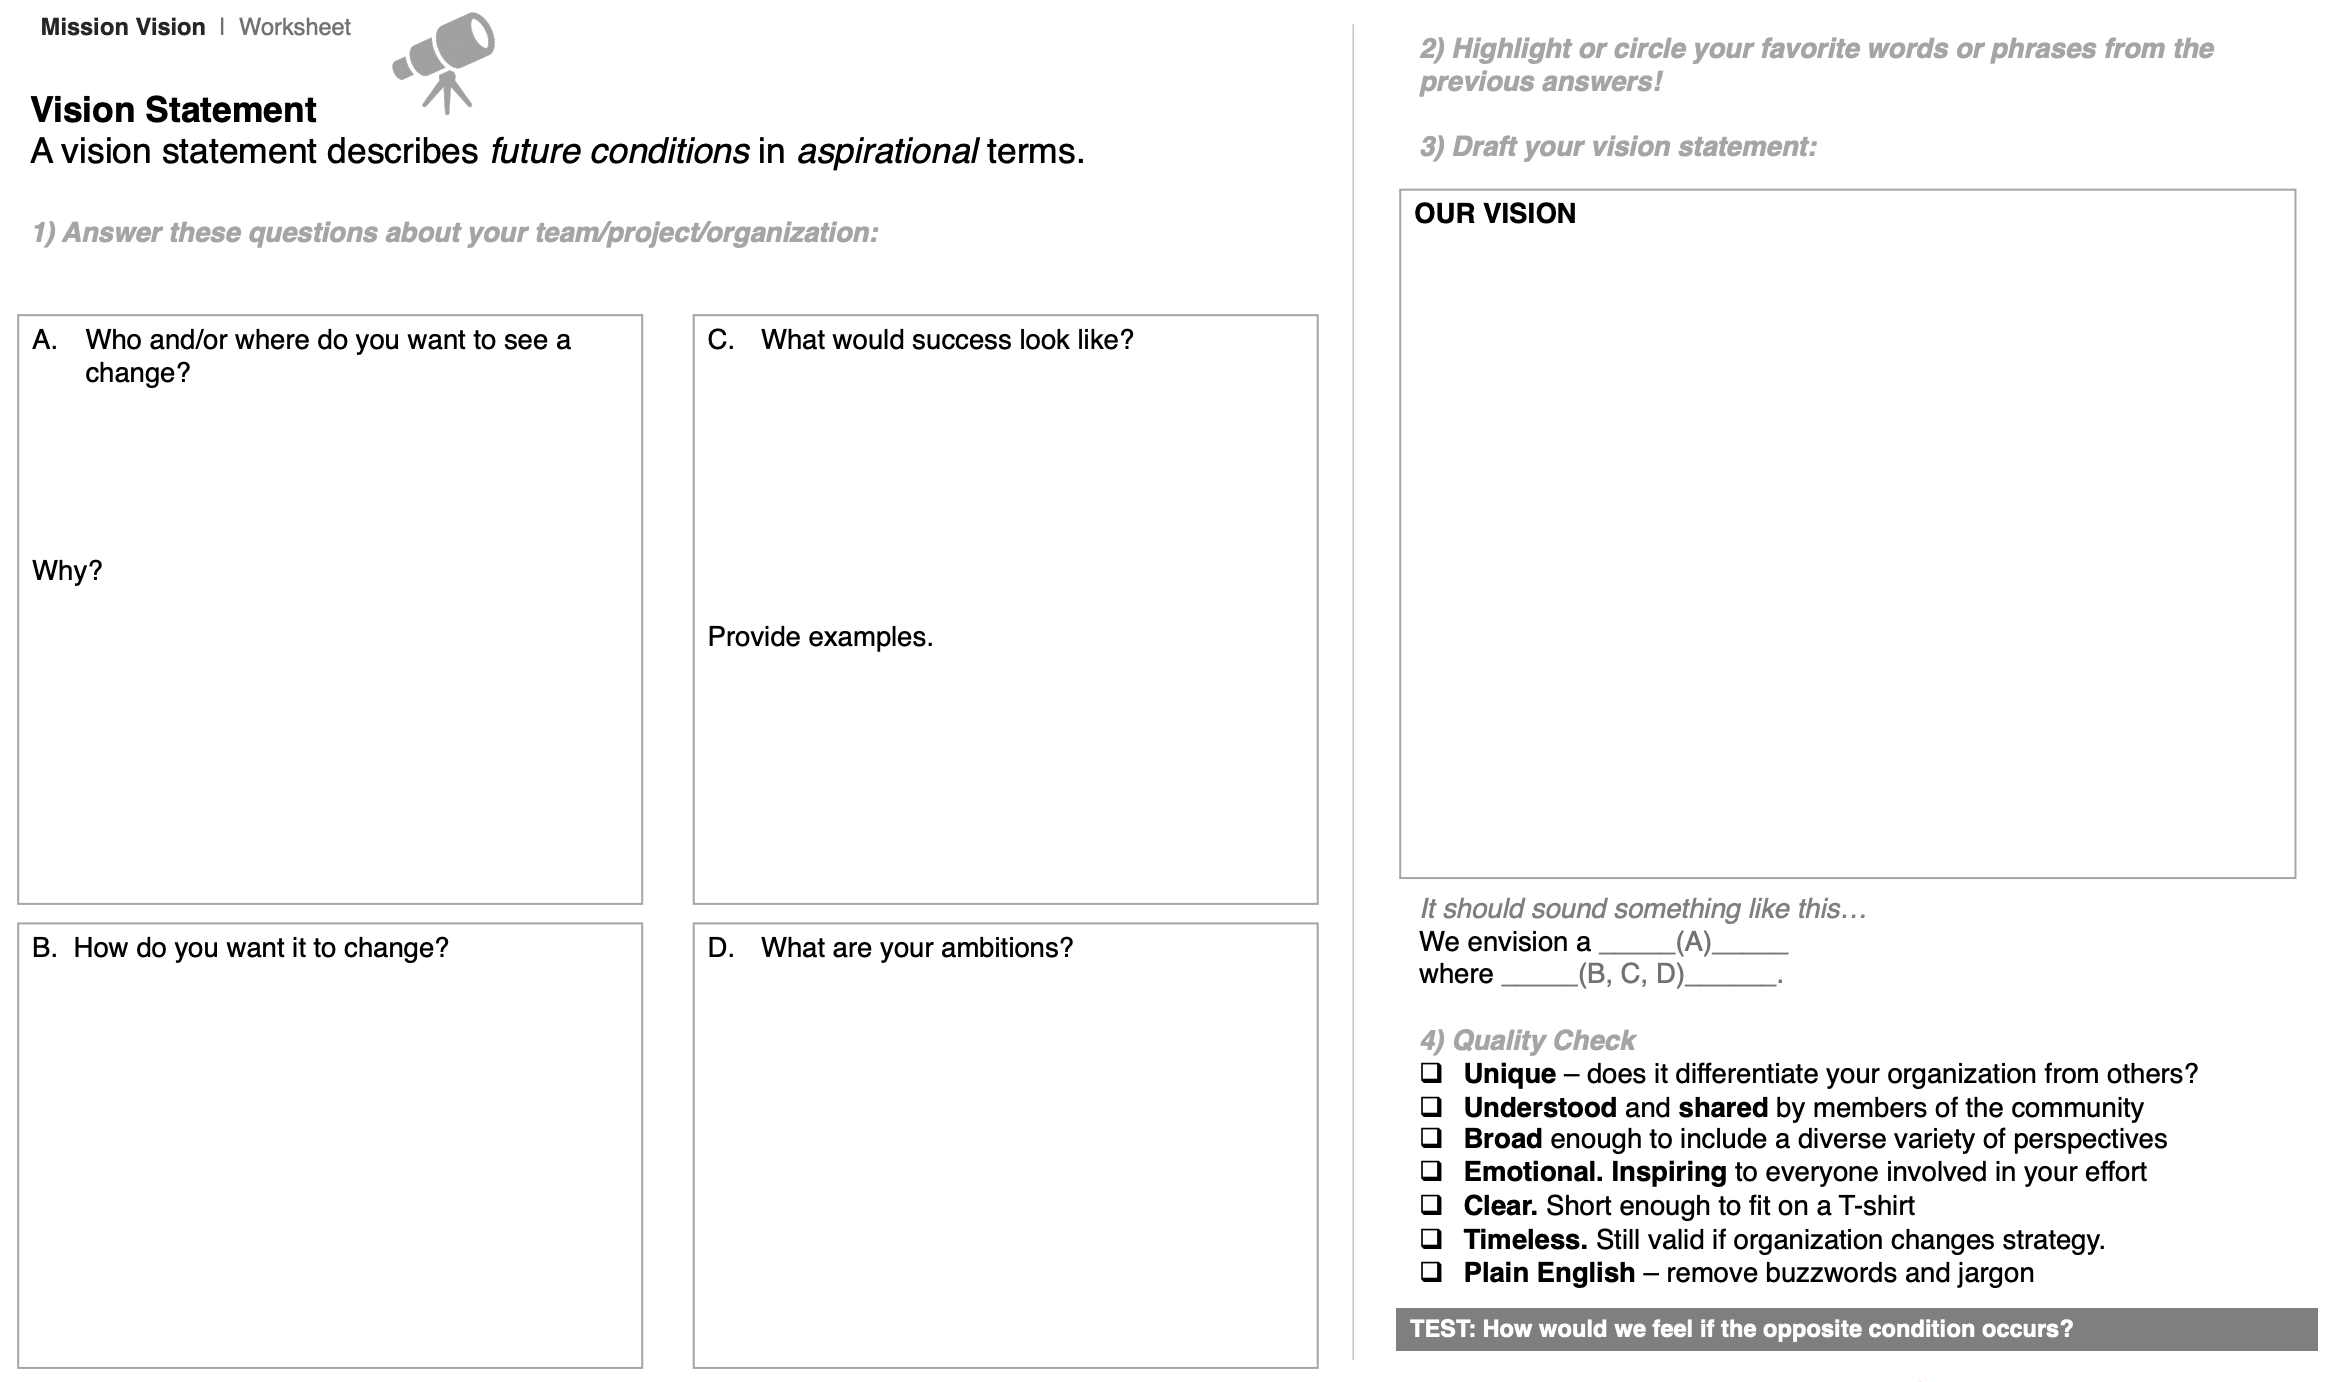 A screenshot of the Innovation Toolkit Mission & Vision Canvas